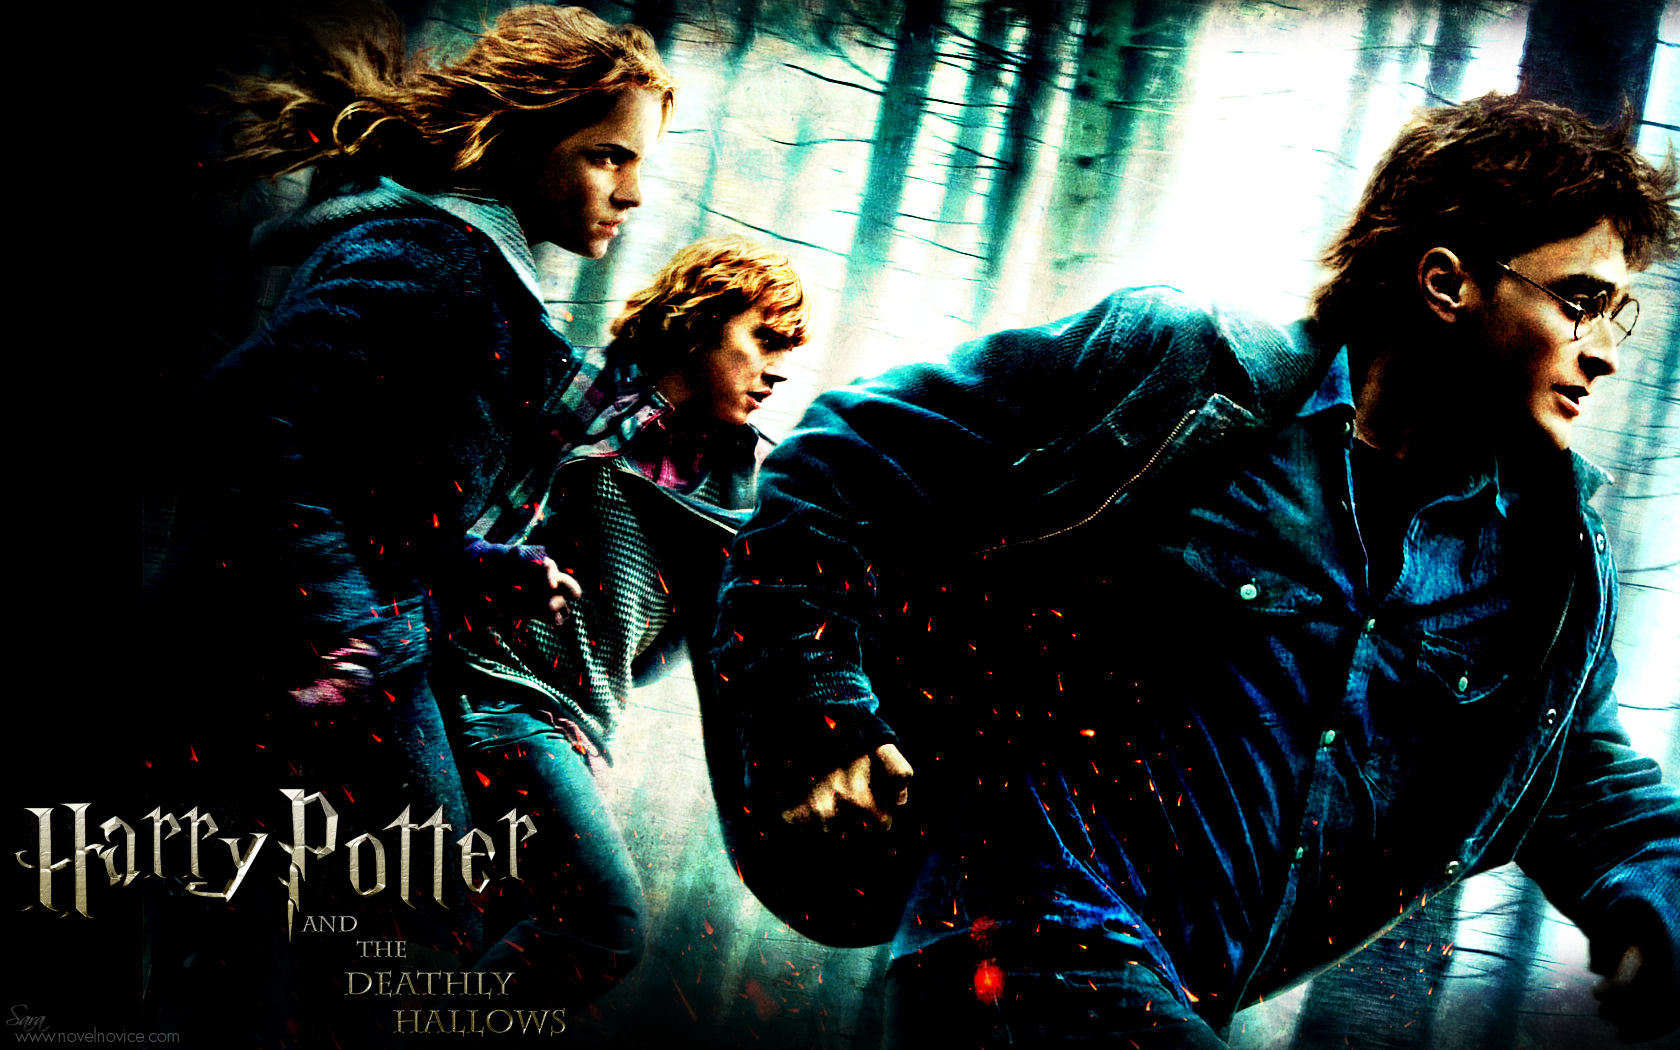 Potter And The Deathly Hallows - HD Wallpaper 